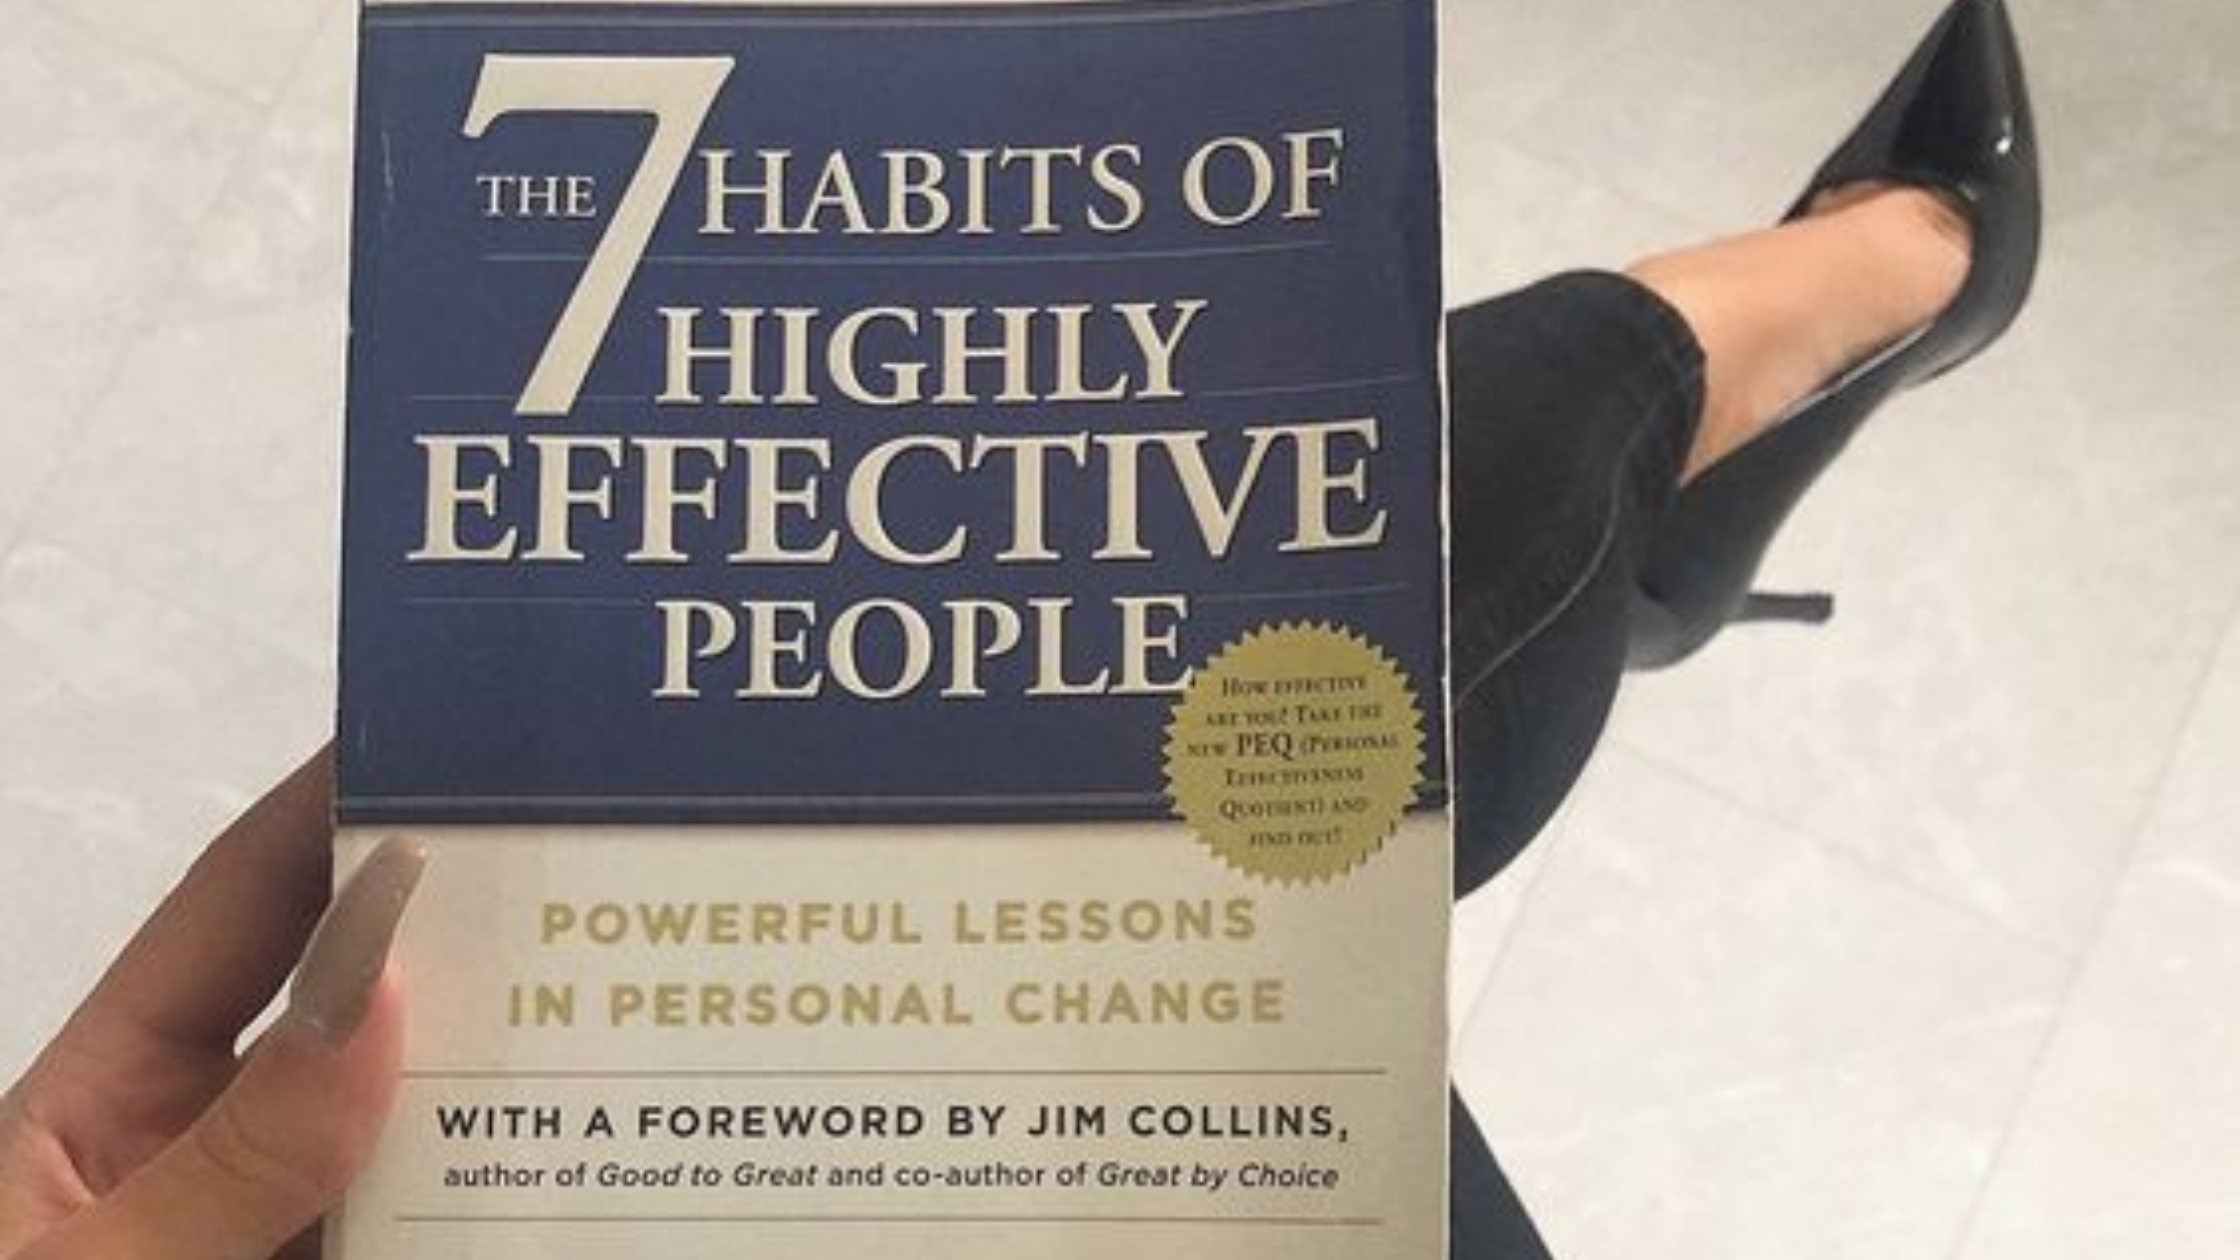 Book of the Month: “The 7 Habits of Highly Effective People” by Stephen R. Covey